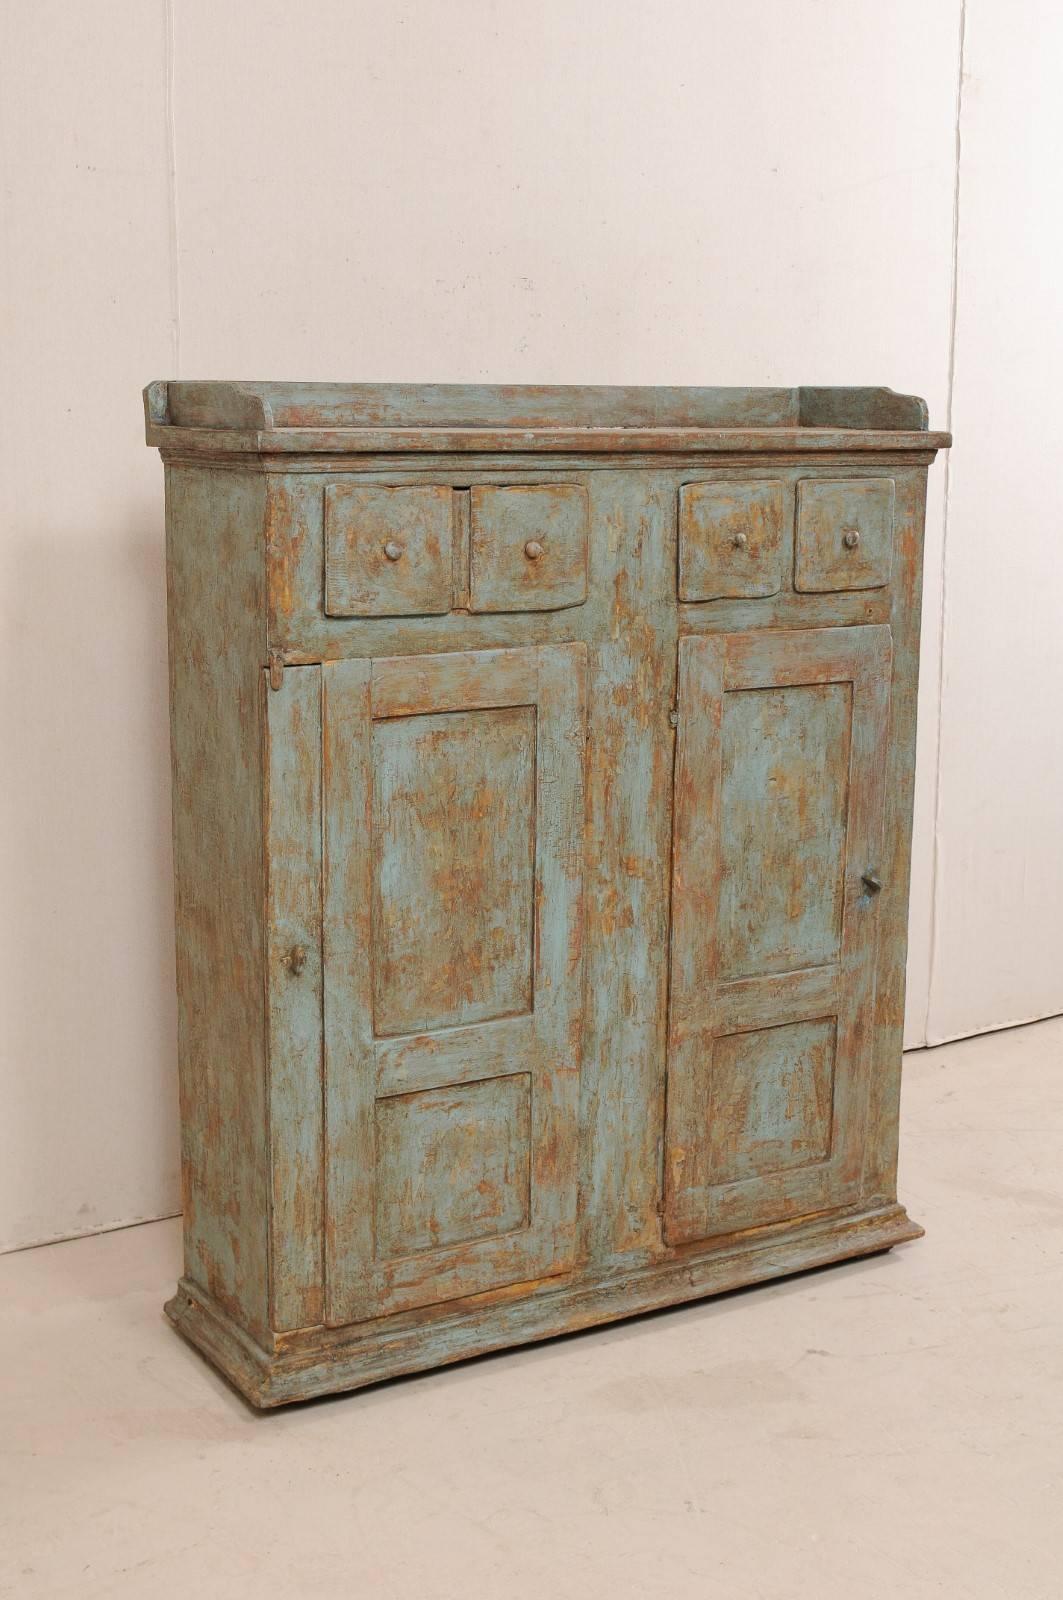 Carved 18th Century Swedish Cabinet with Lovely Scraped Blue Finish